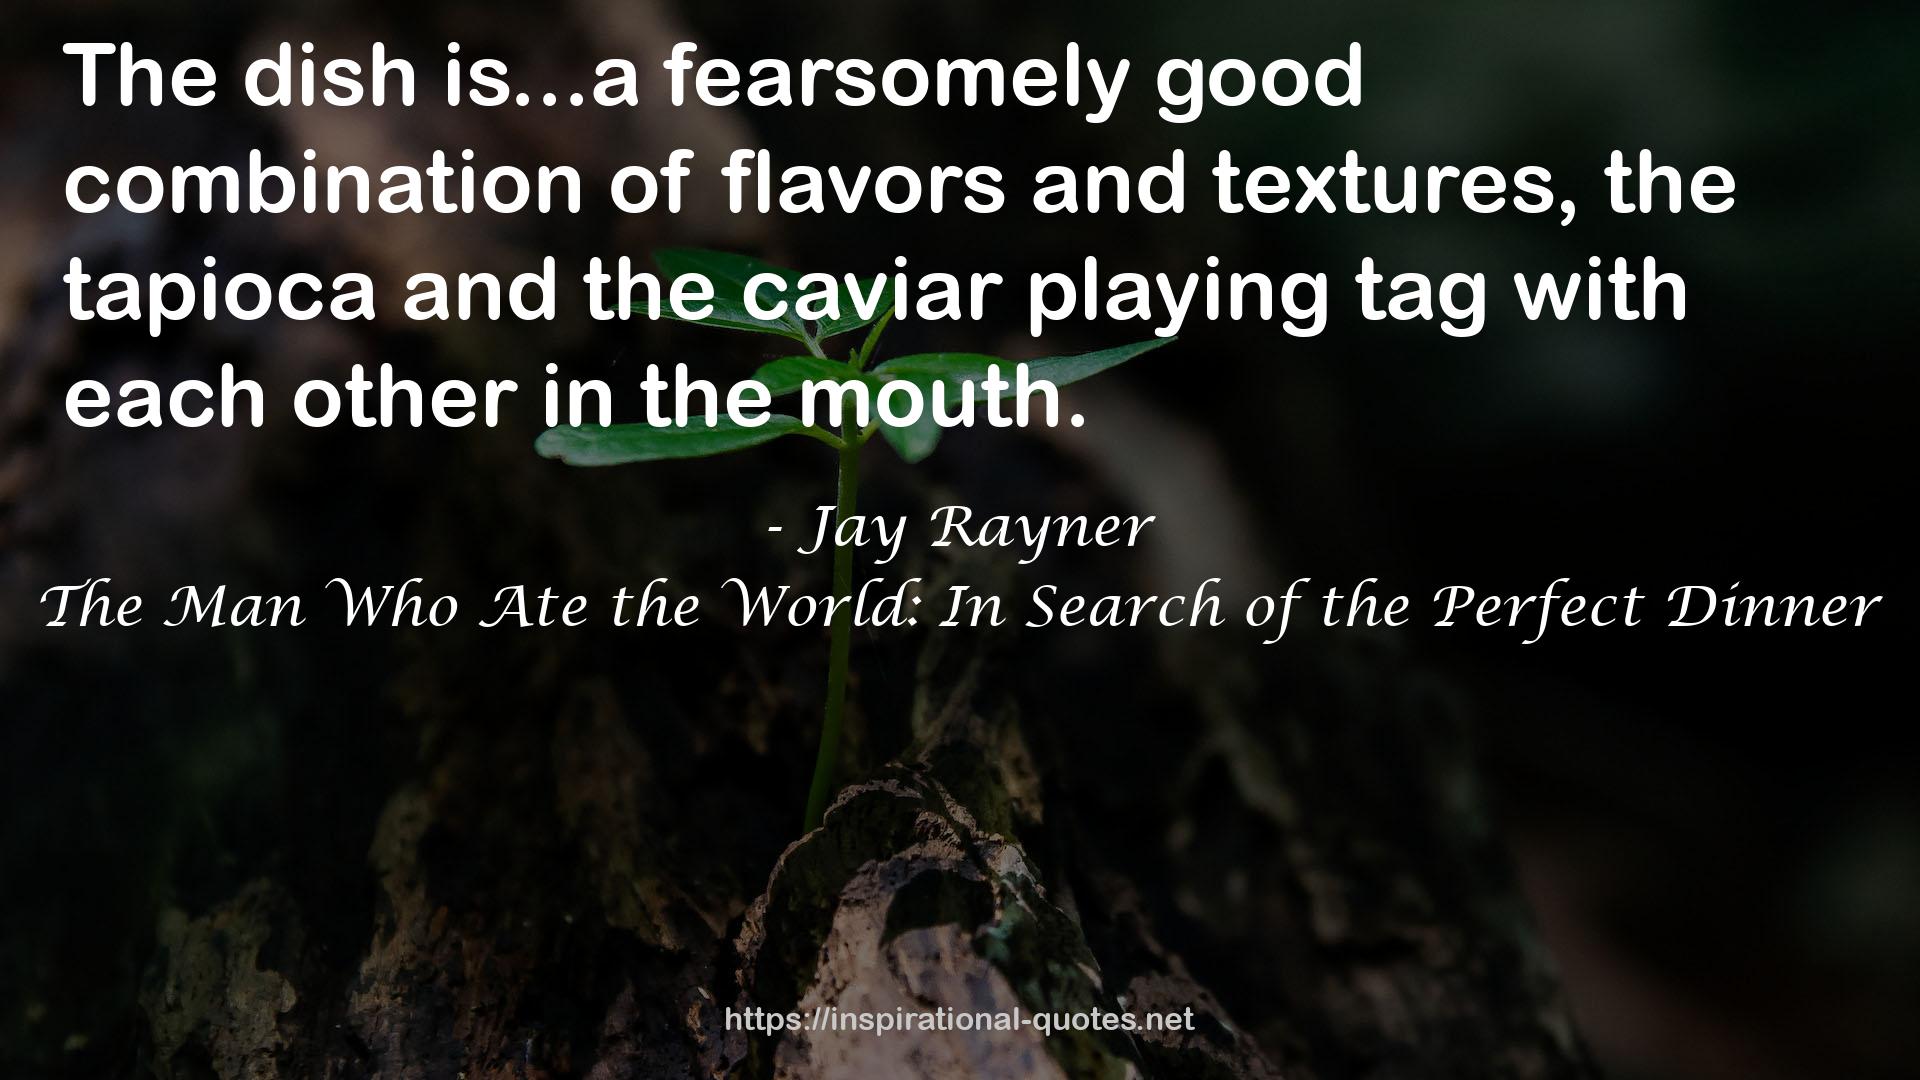 The Man Who Ate the World: In Search of the Perfect Dinner QUOTES